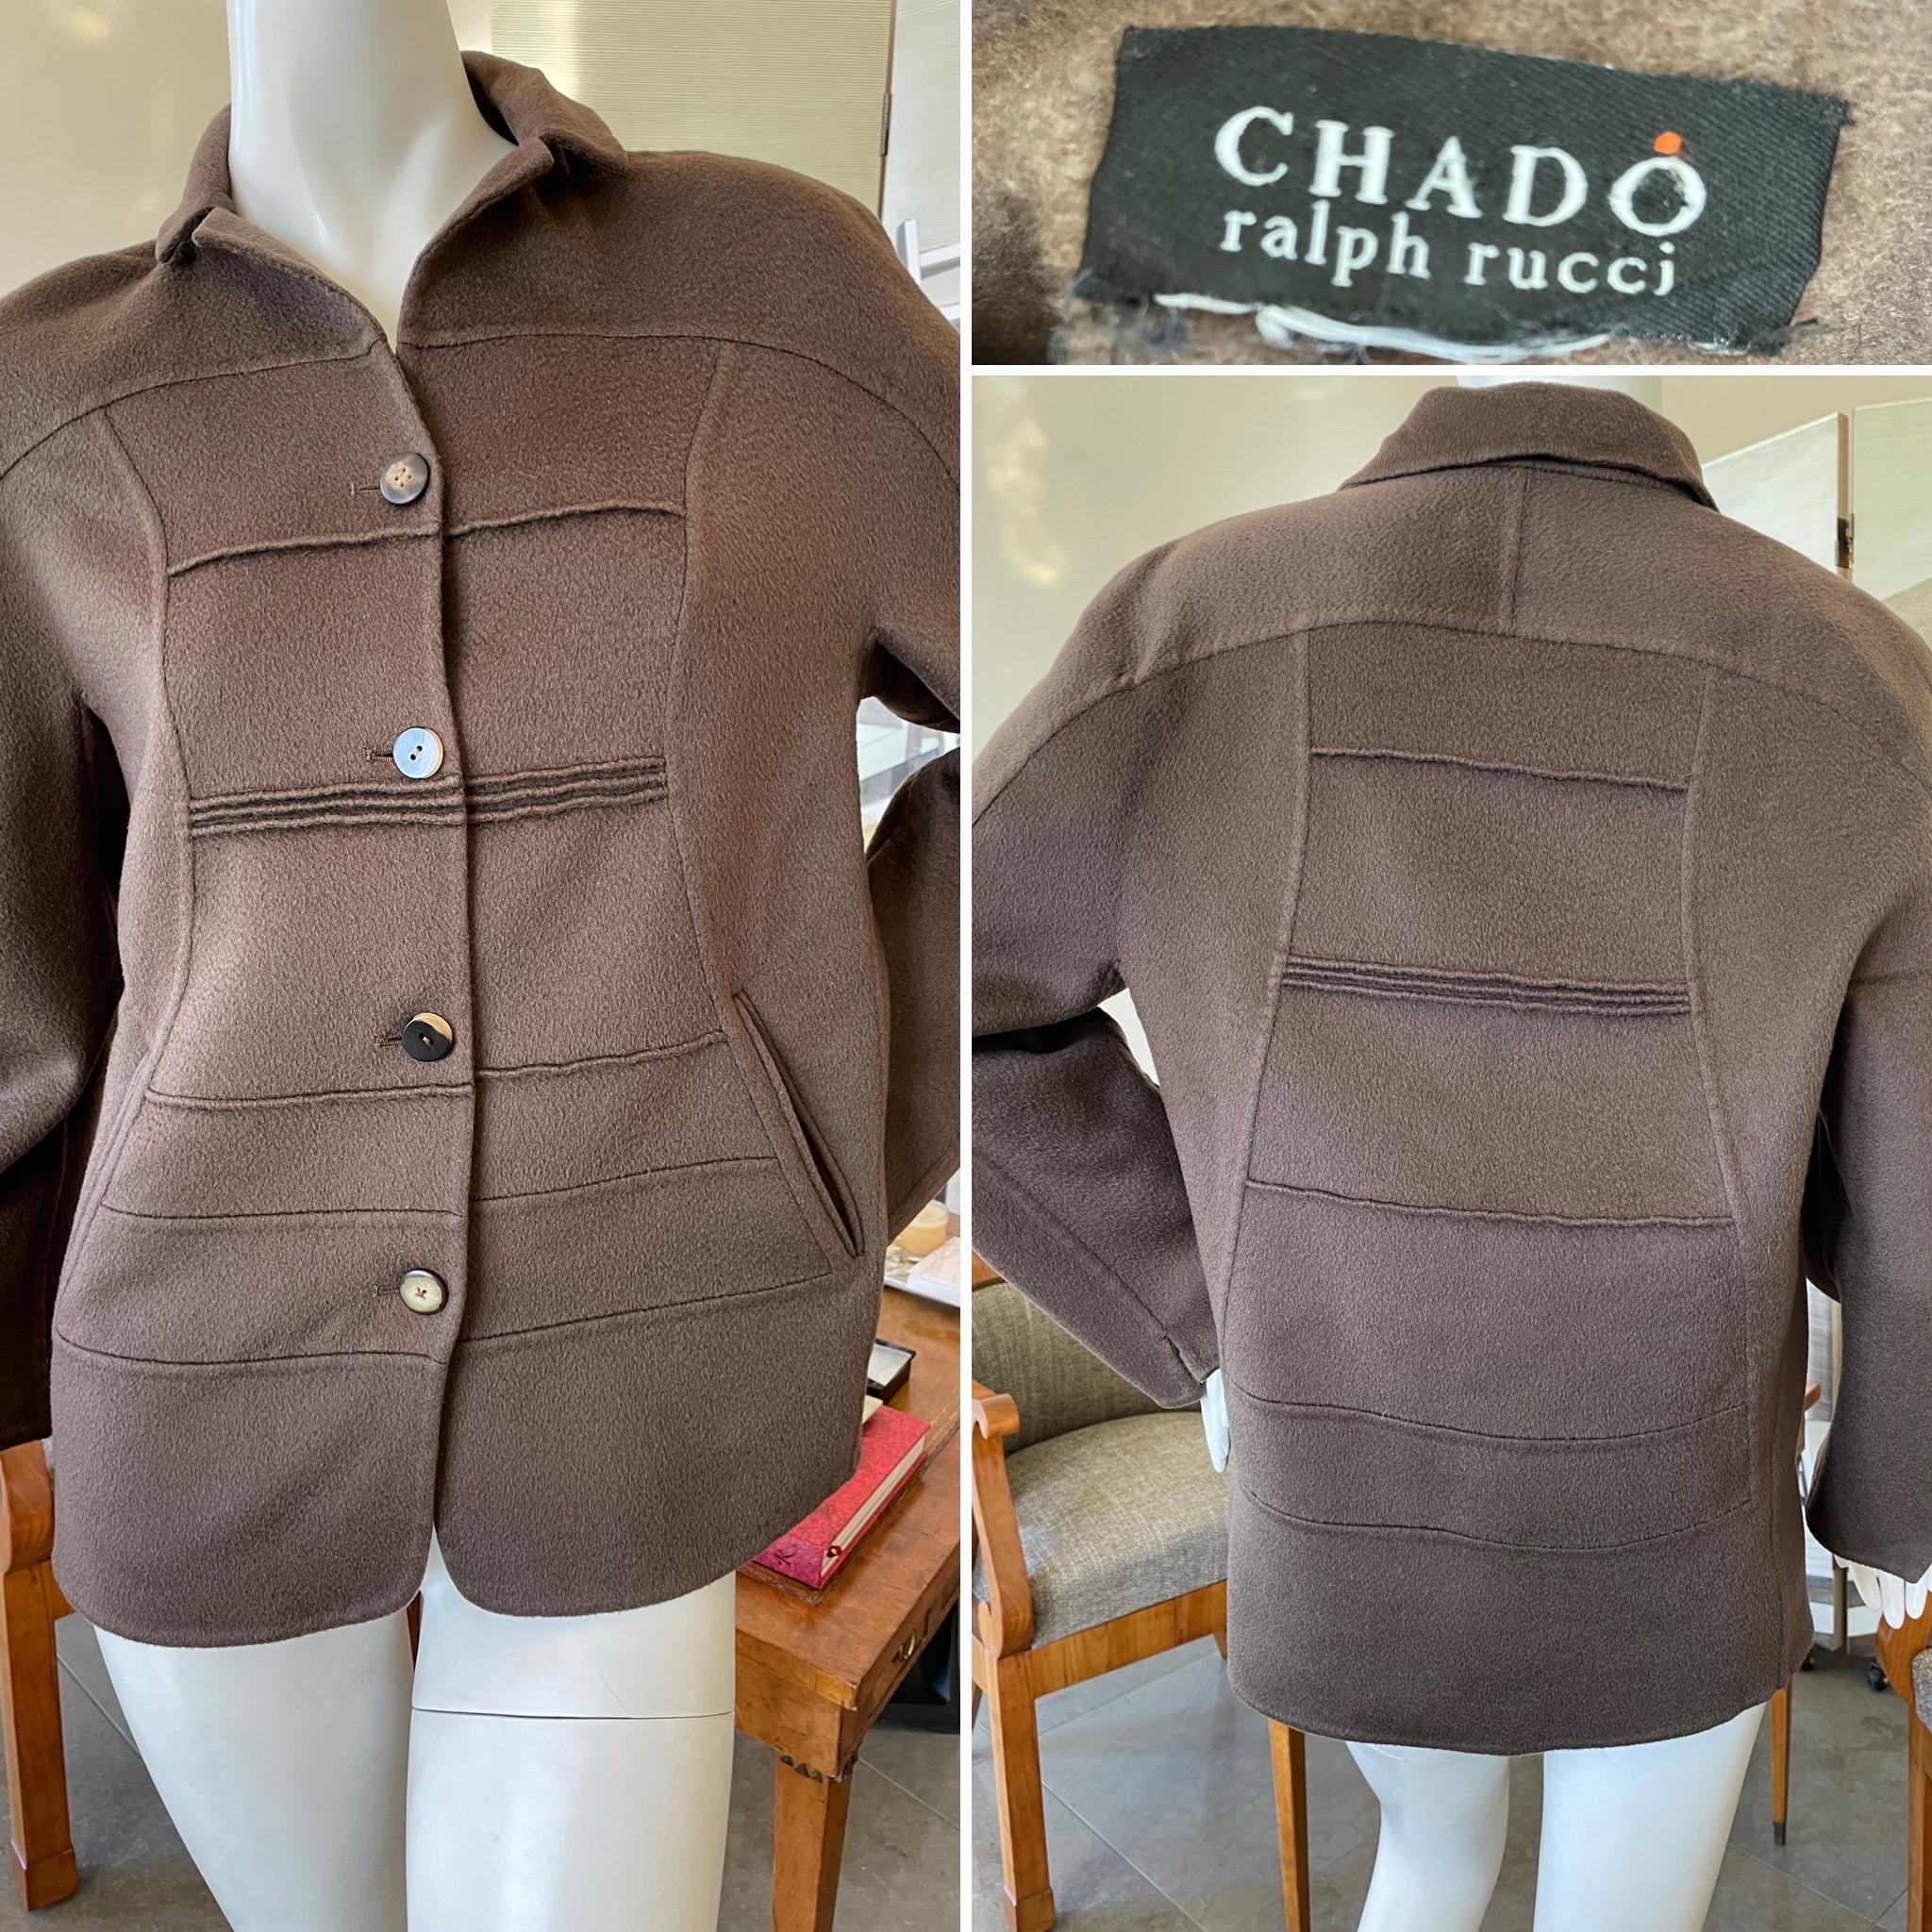 Chado Ralph Rucci Pure Cashmere Jacket.
Detailed to perfection as only Ralph can, pure luxe.
Pockets on the jacket are still sewn shut, I don't think this was ever worn.
No size tag, size M-L
Jacket 
Bust 40